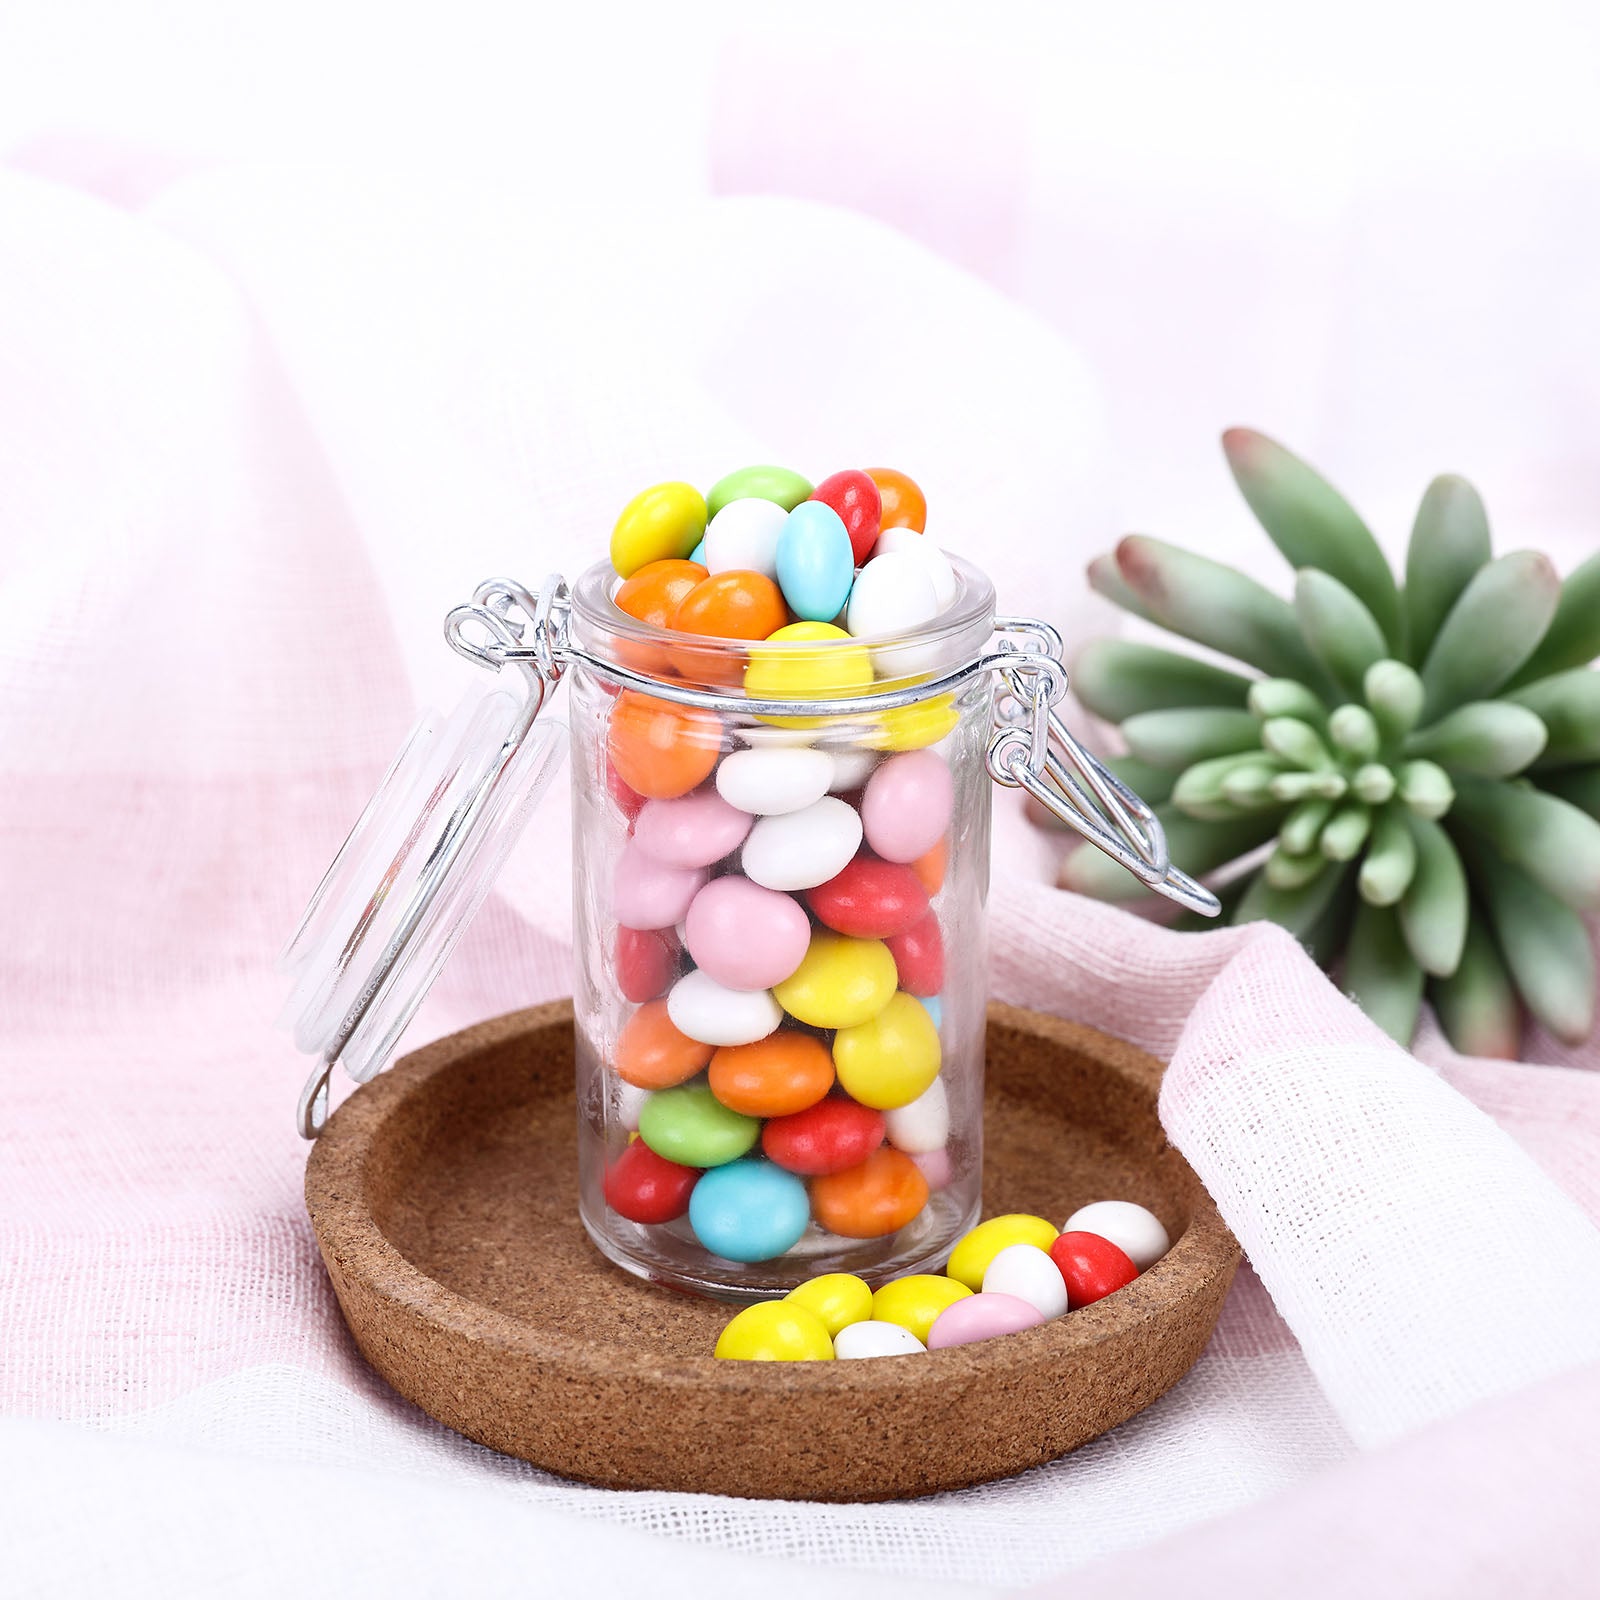 Hinged-Lid Glass Favor Jars - New Items